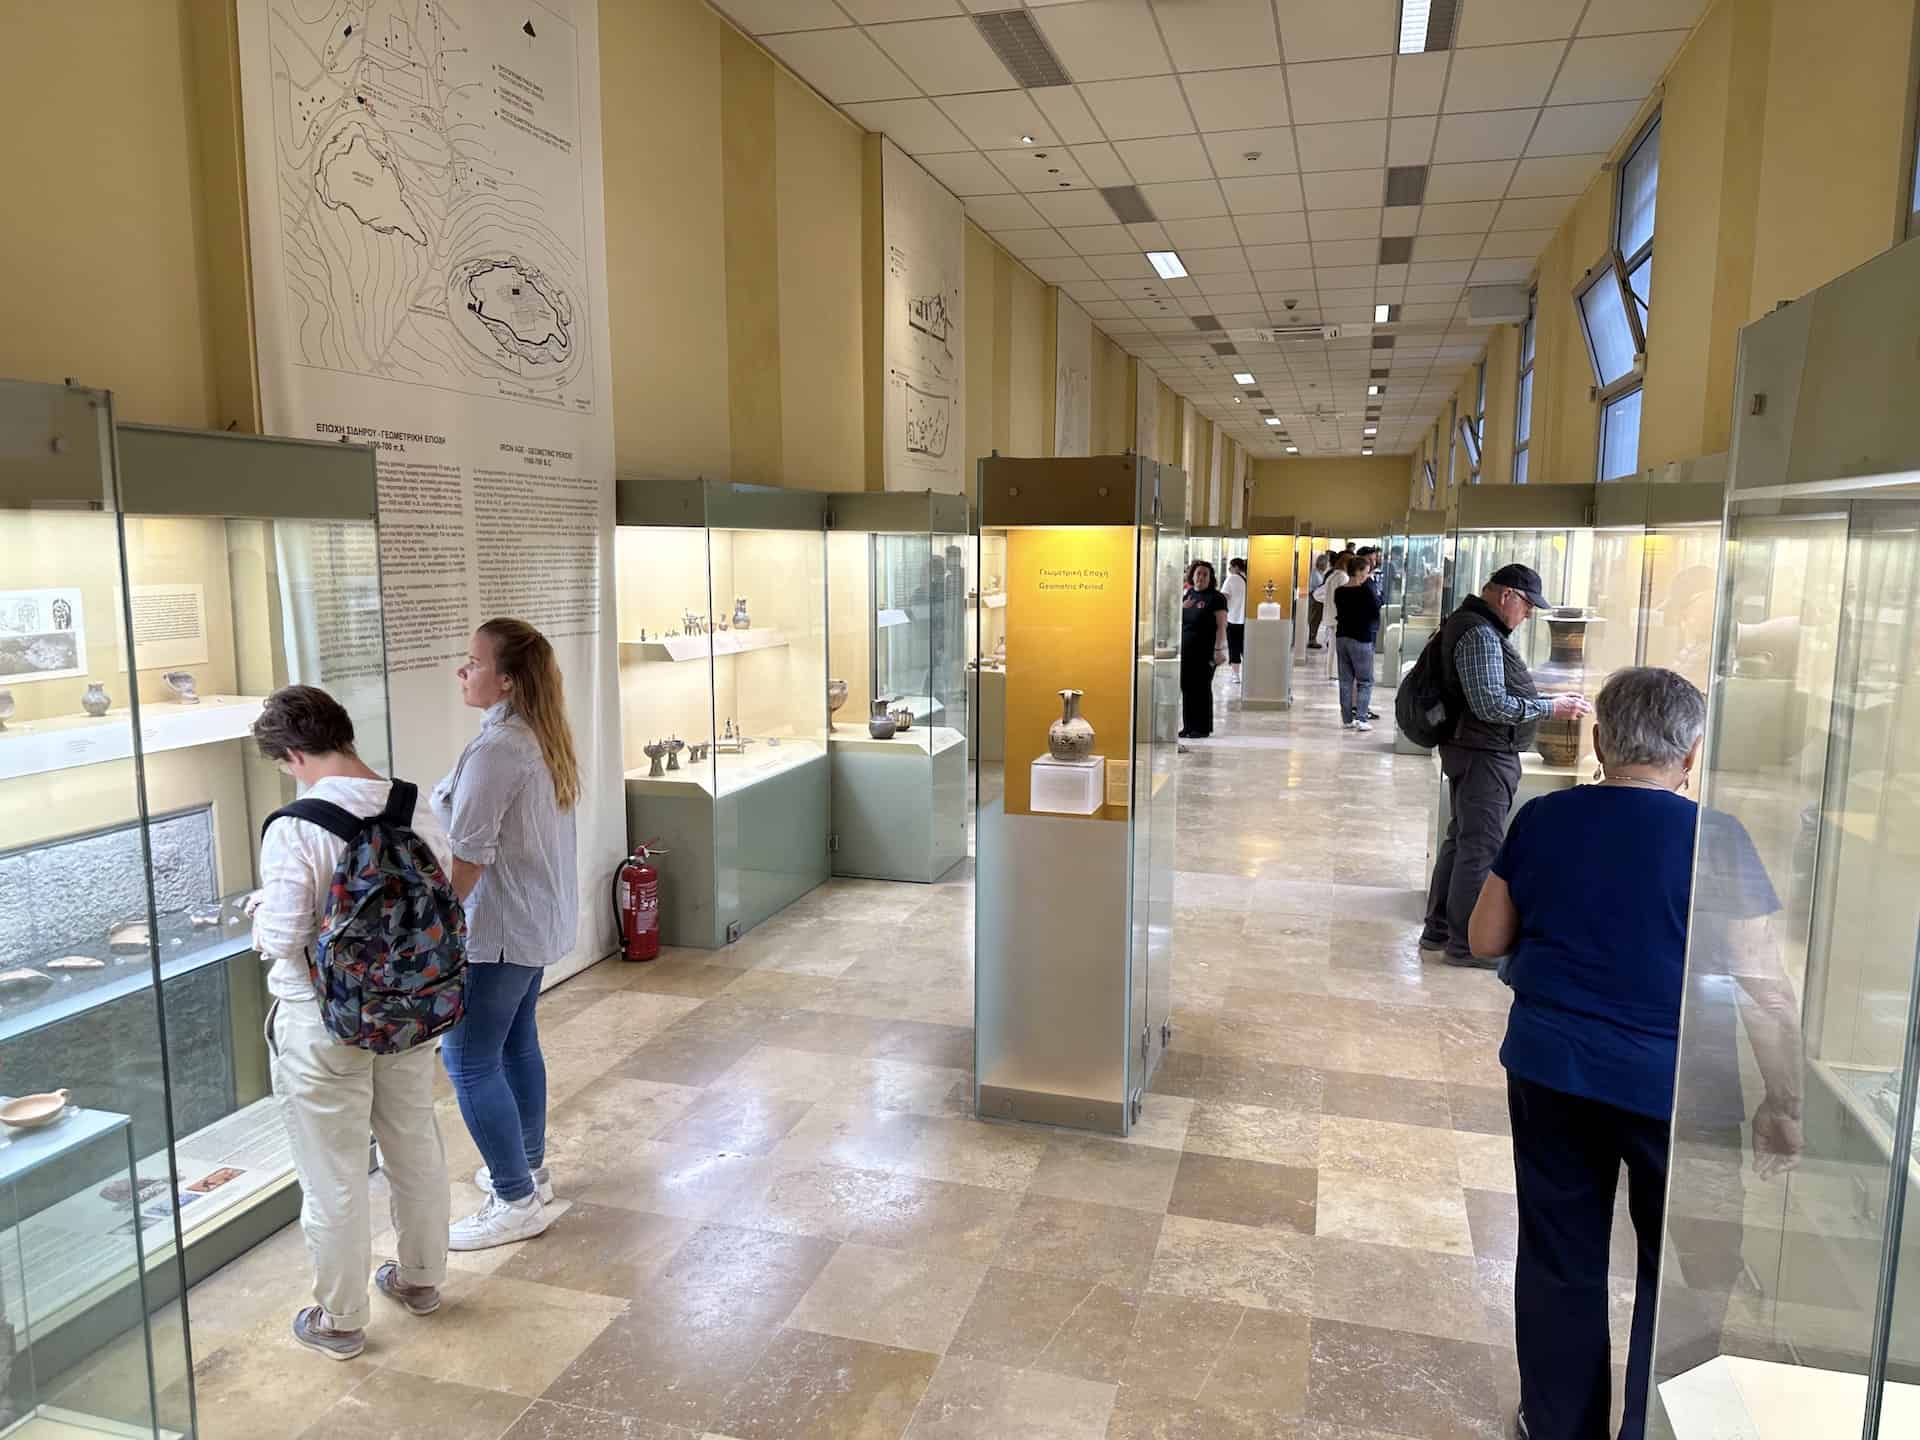 Exhibits in the shops of the Stoa of Attalos